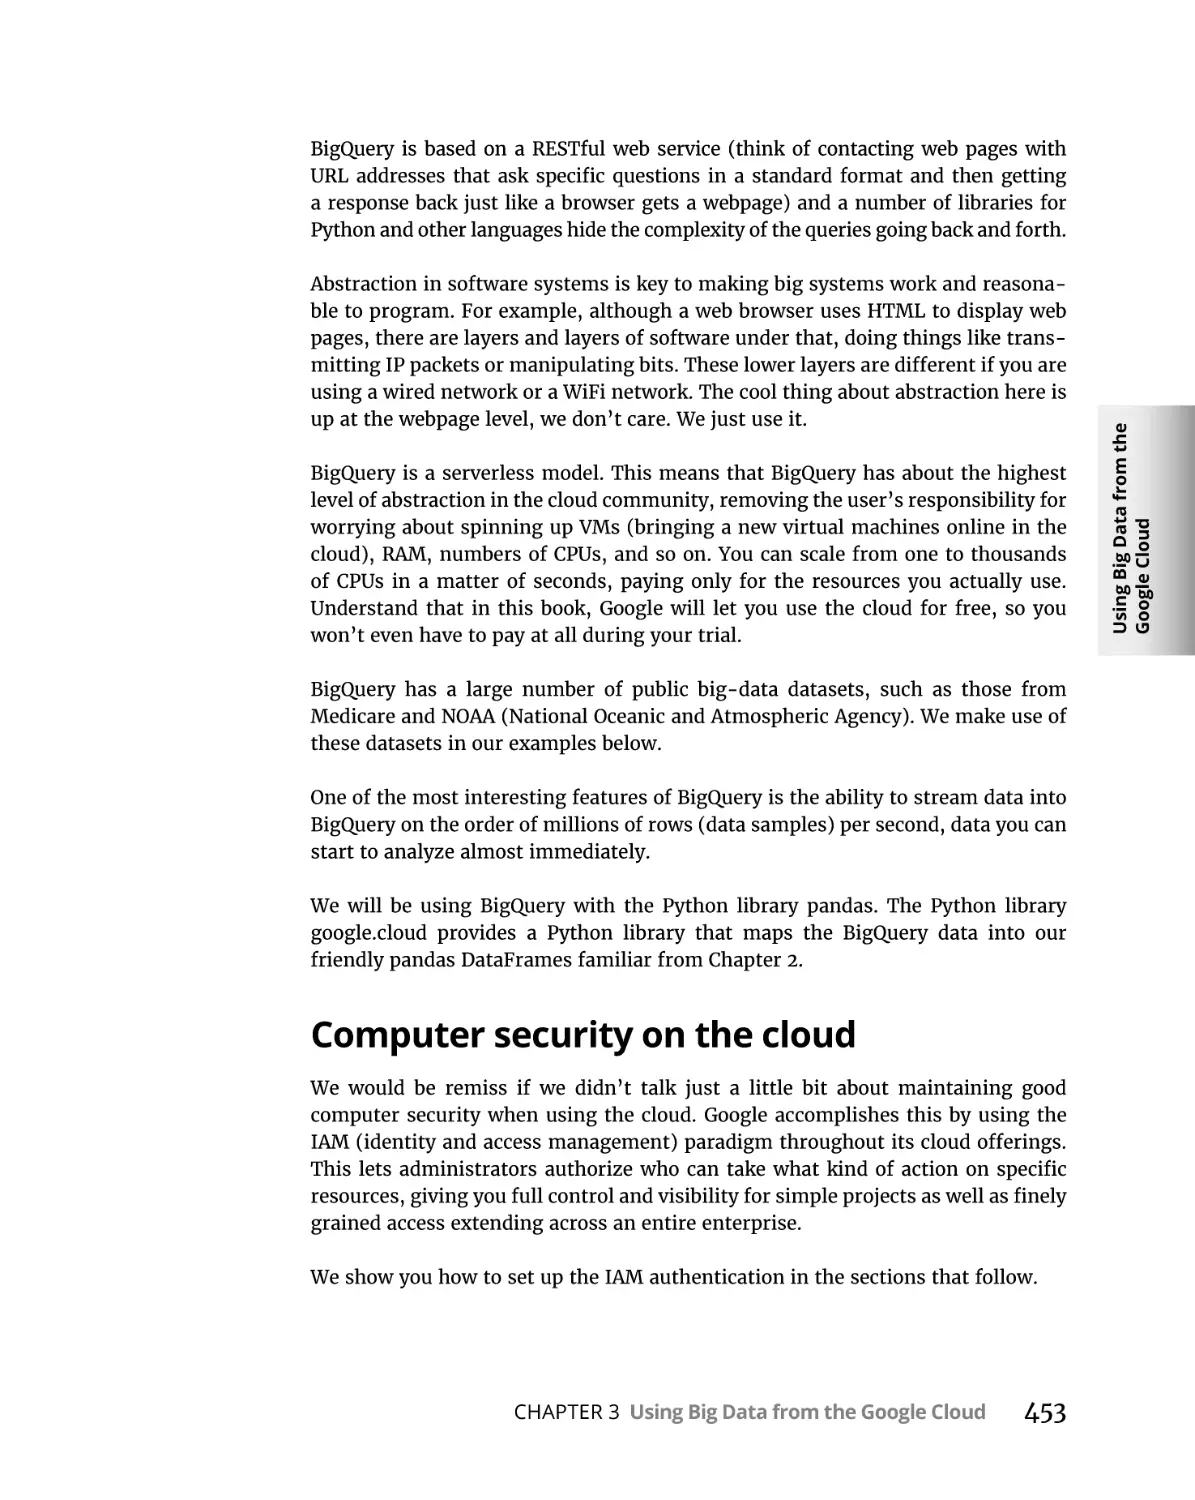 Computer security on the cloud